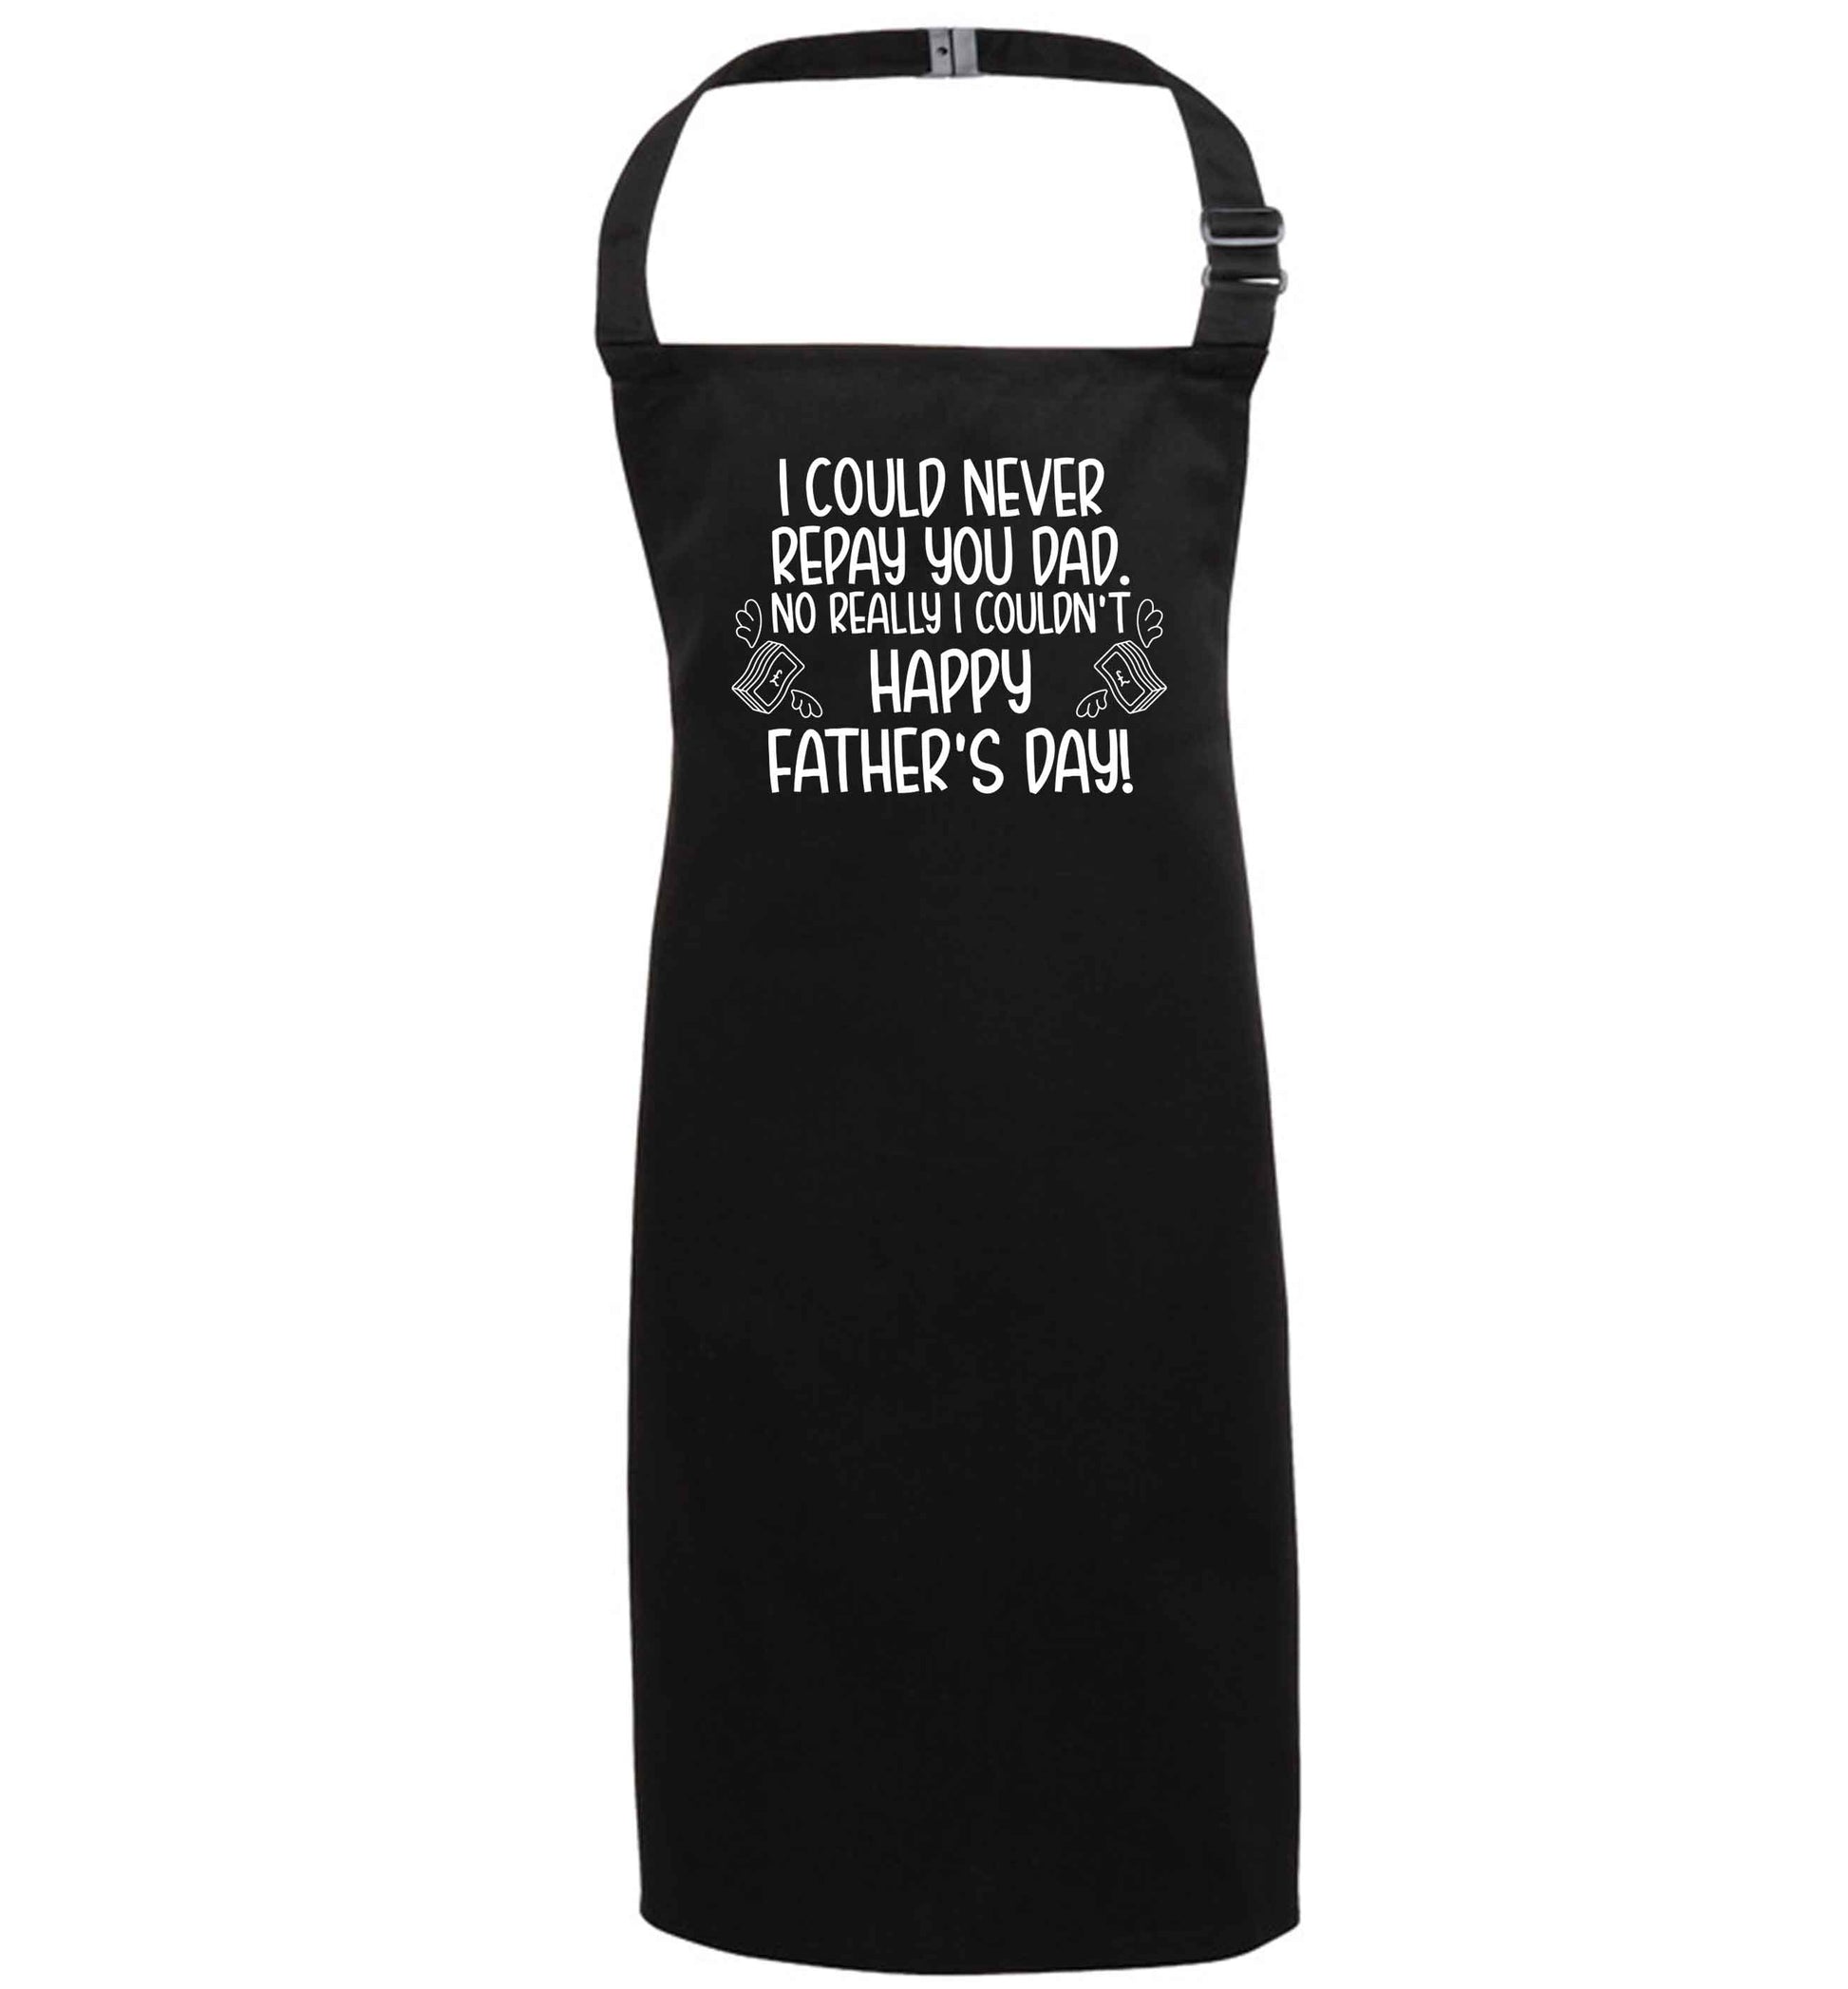 I could never repay you dad. No I really couldn't happy Father's day! black apron 7-10 years